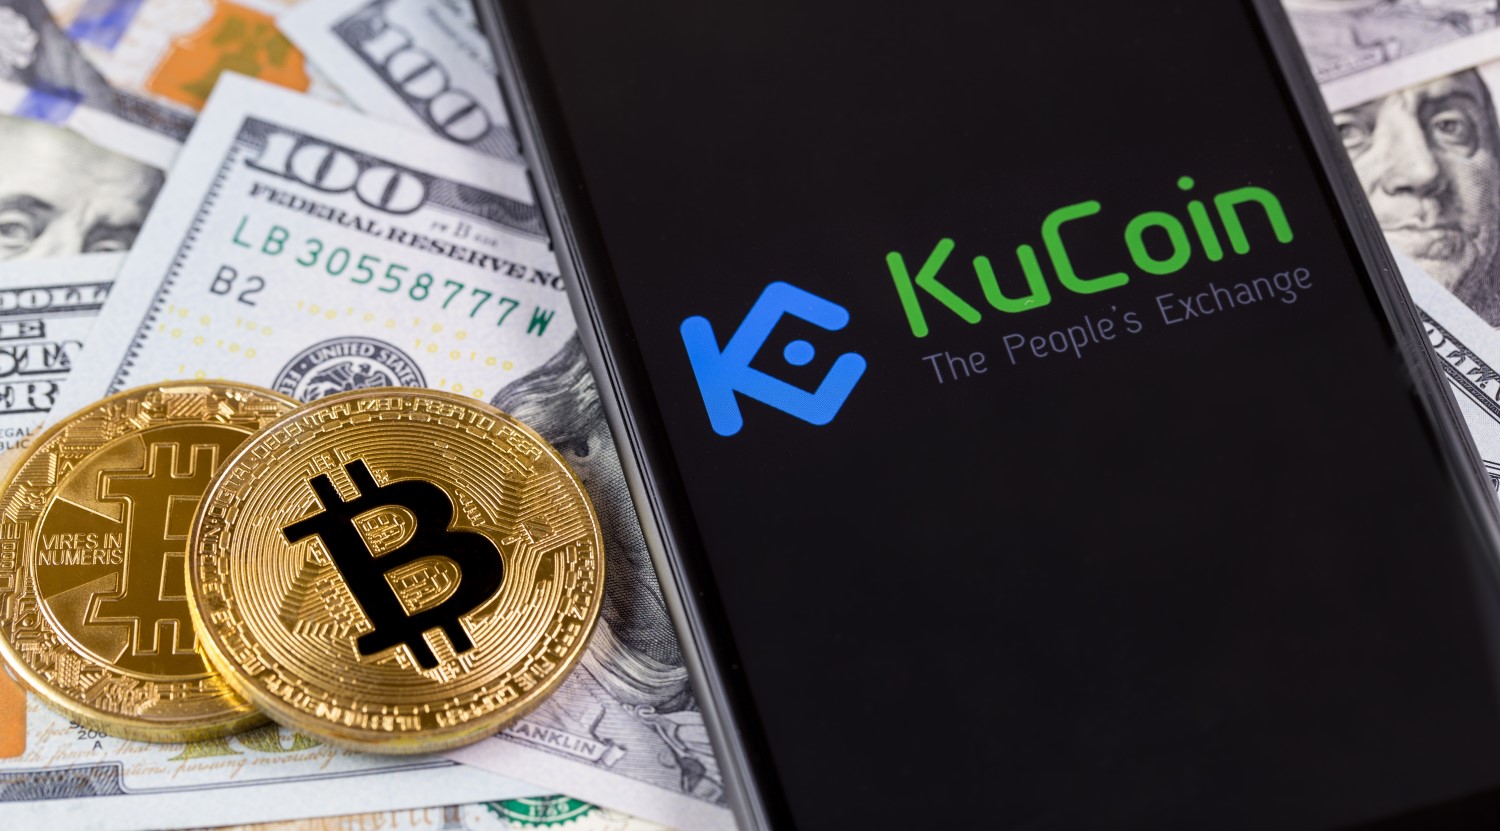 Picture of the KuCoin app open on a mobile phone with two bitcoins next to it